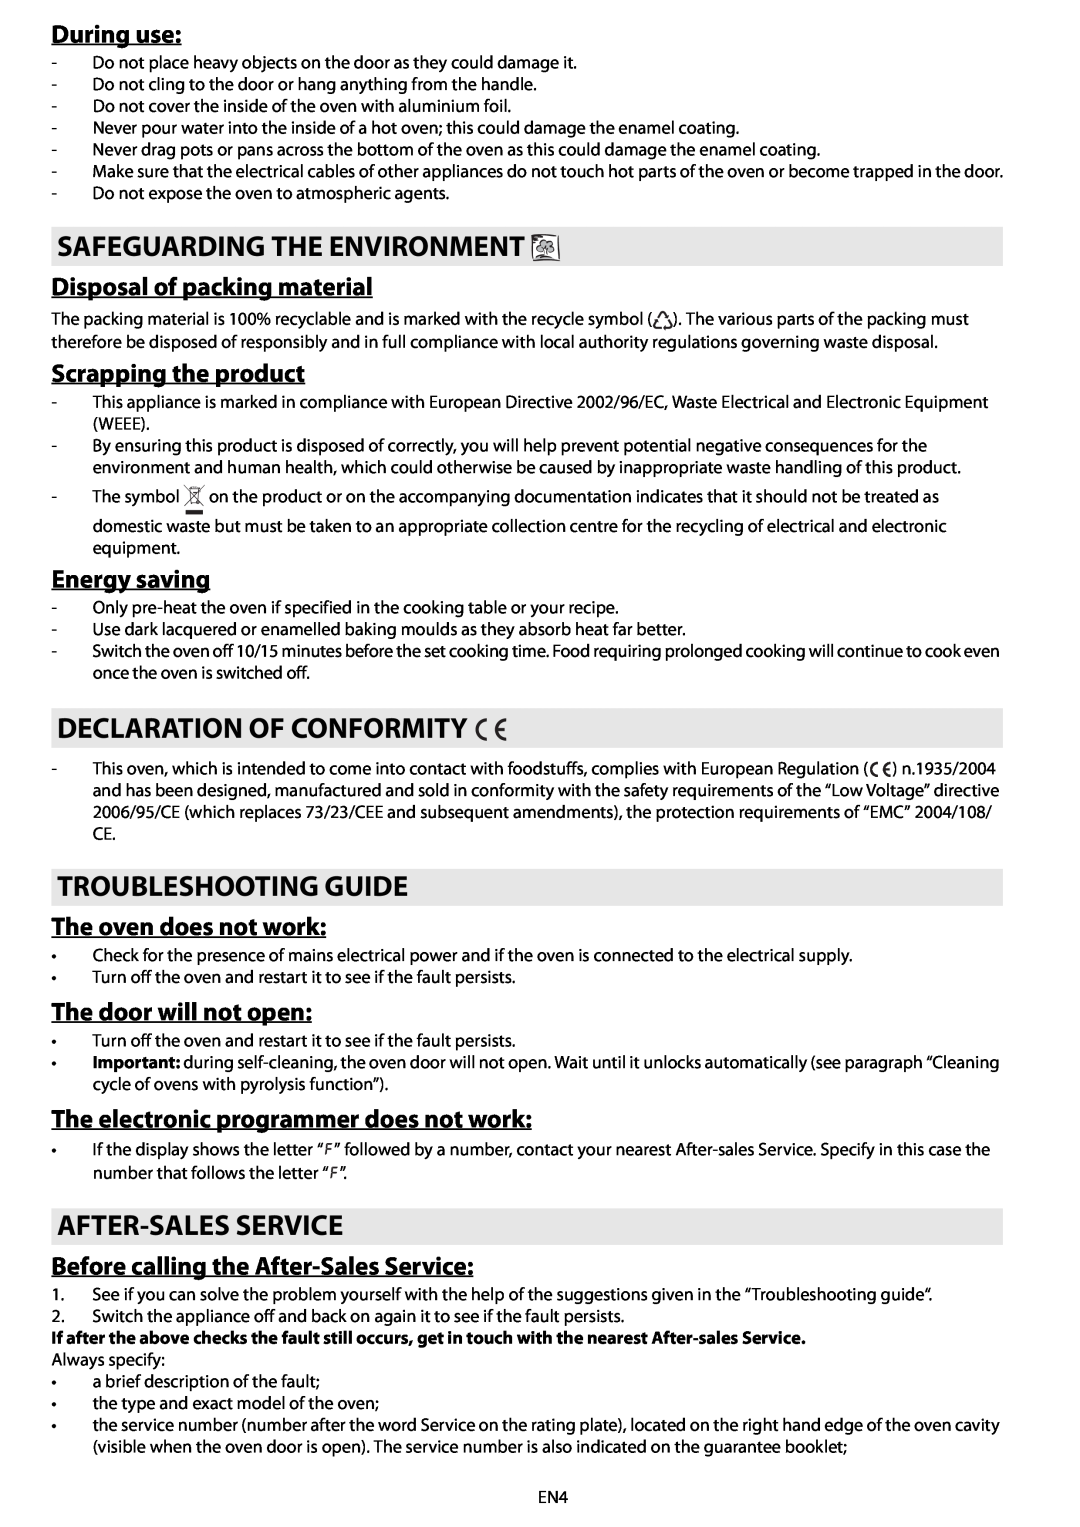 Whirlpool AKZ 562 Safeguarding The Environment, Declaration Of Conformity, Troubleshooting Guide, After-Sales Service 